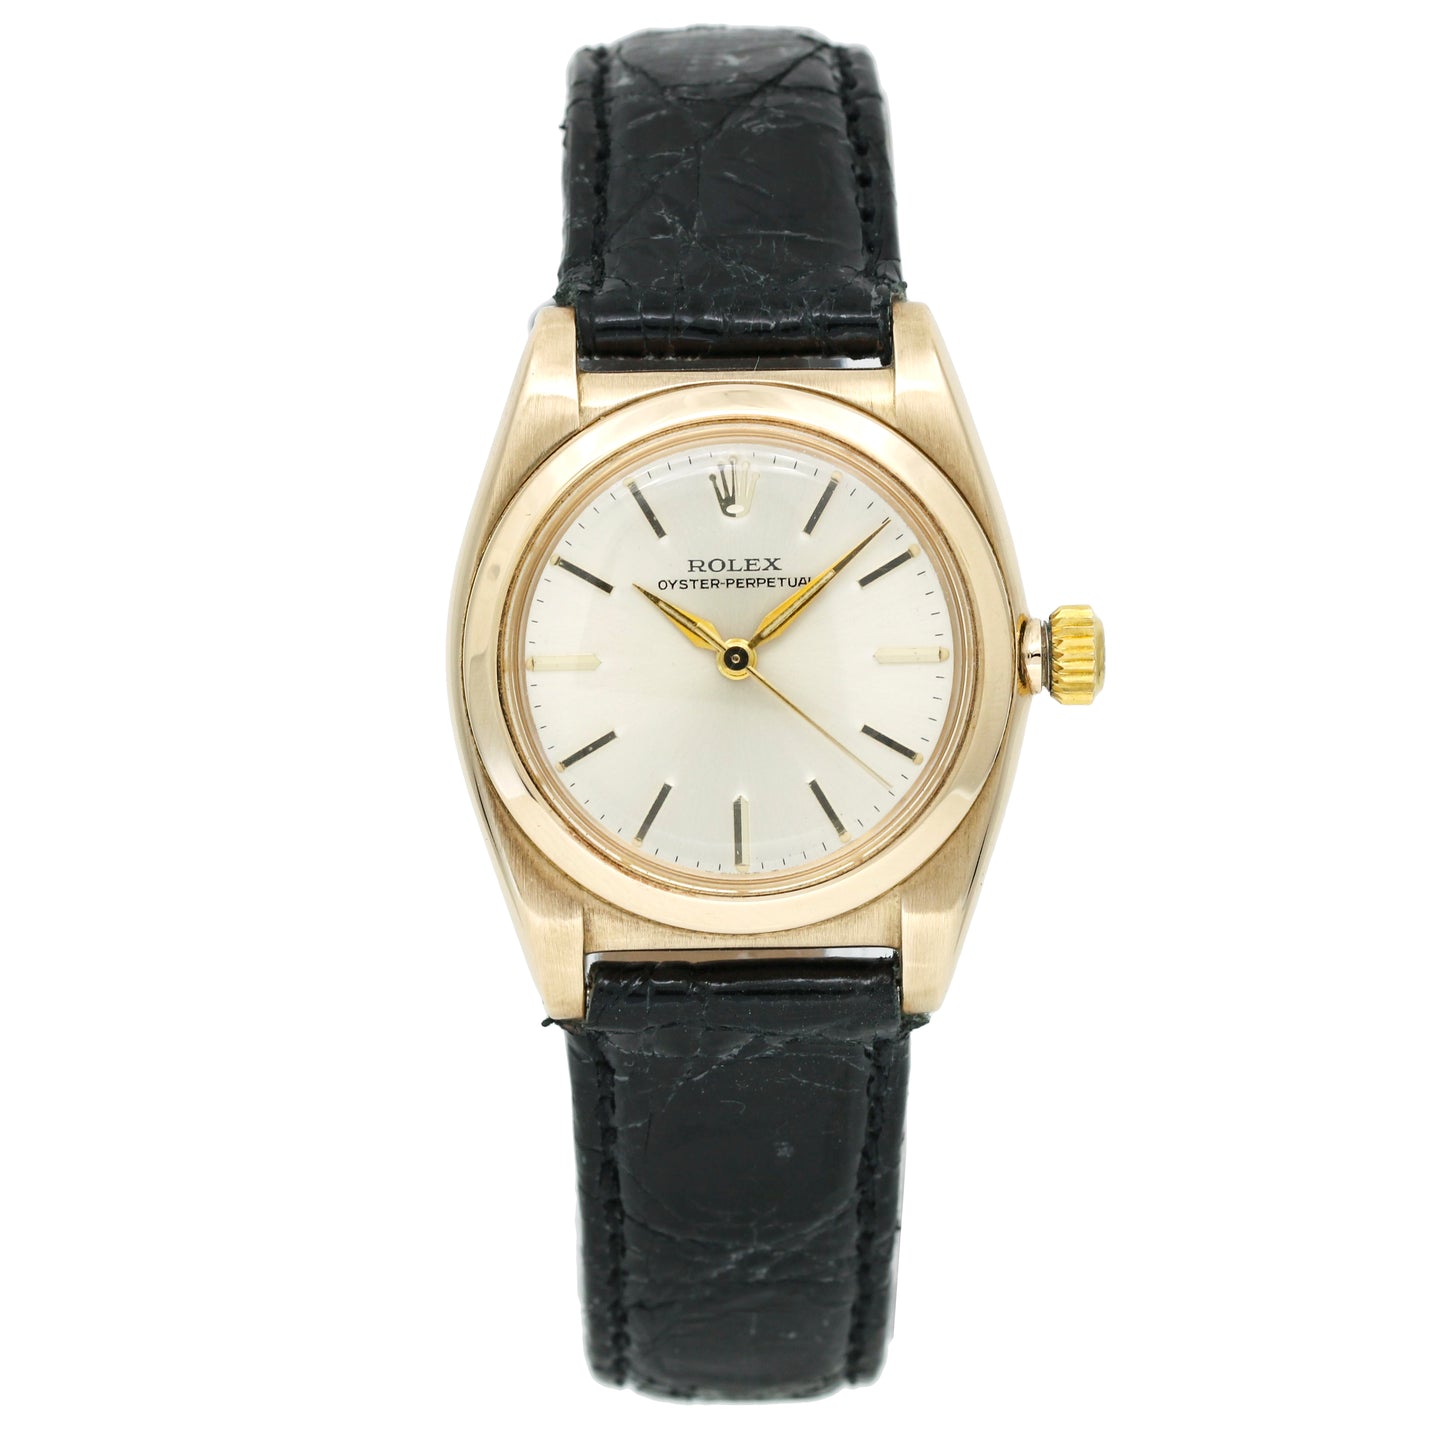 1937 Rolex Oyster Perpetual 14k Yellow Gold Bubble Back Watch 3131